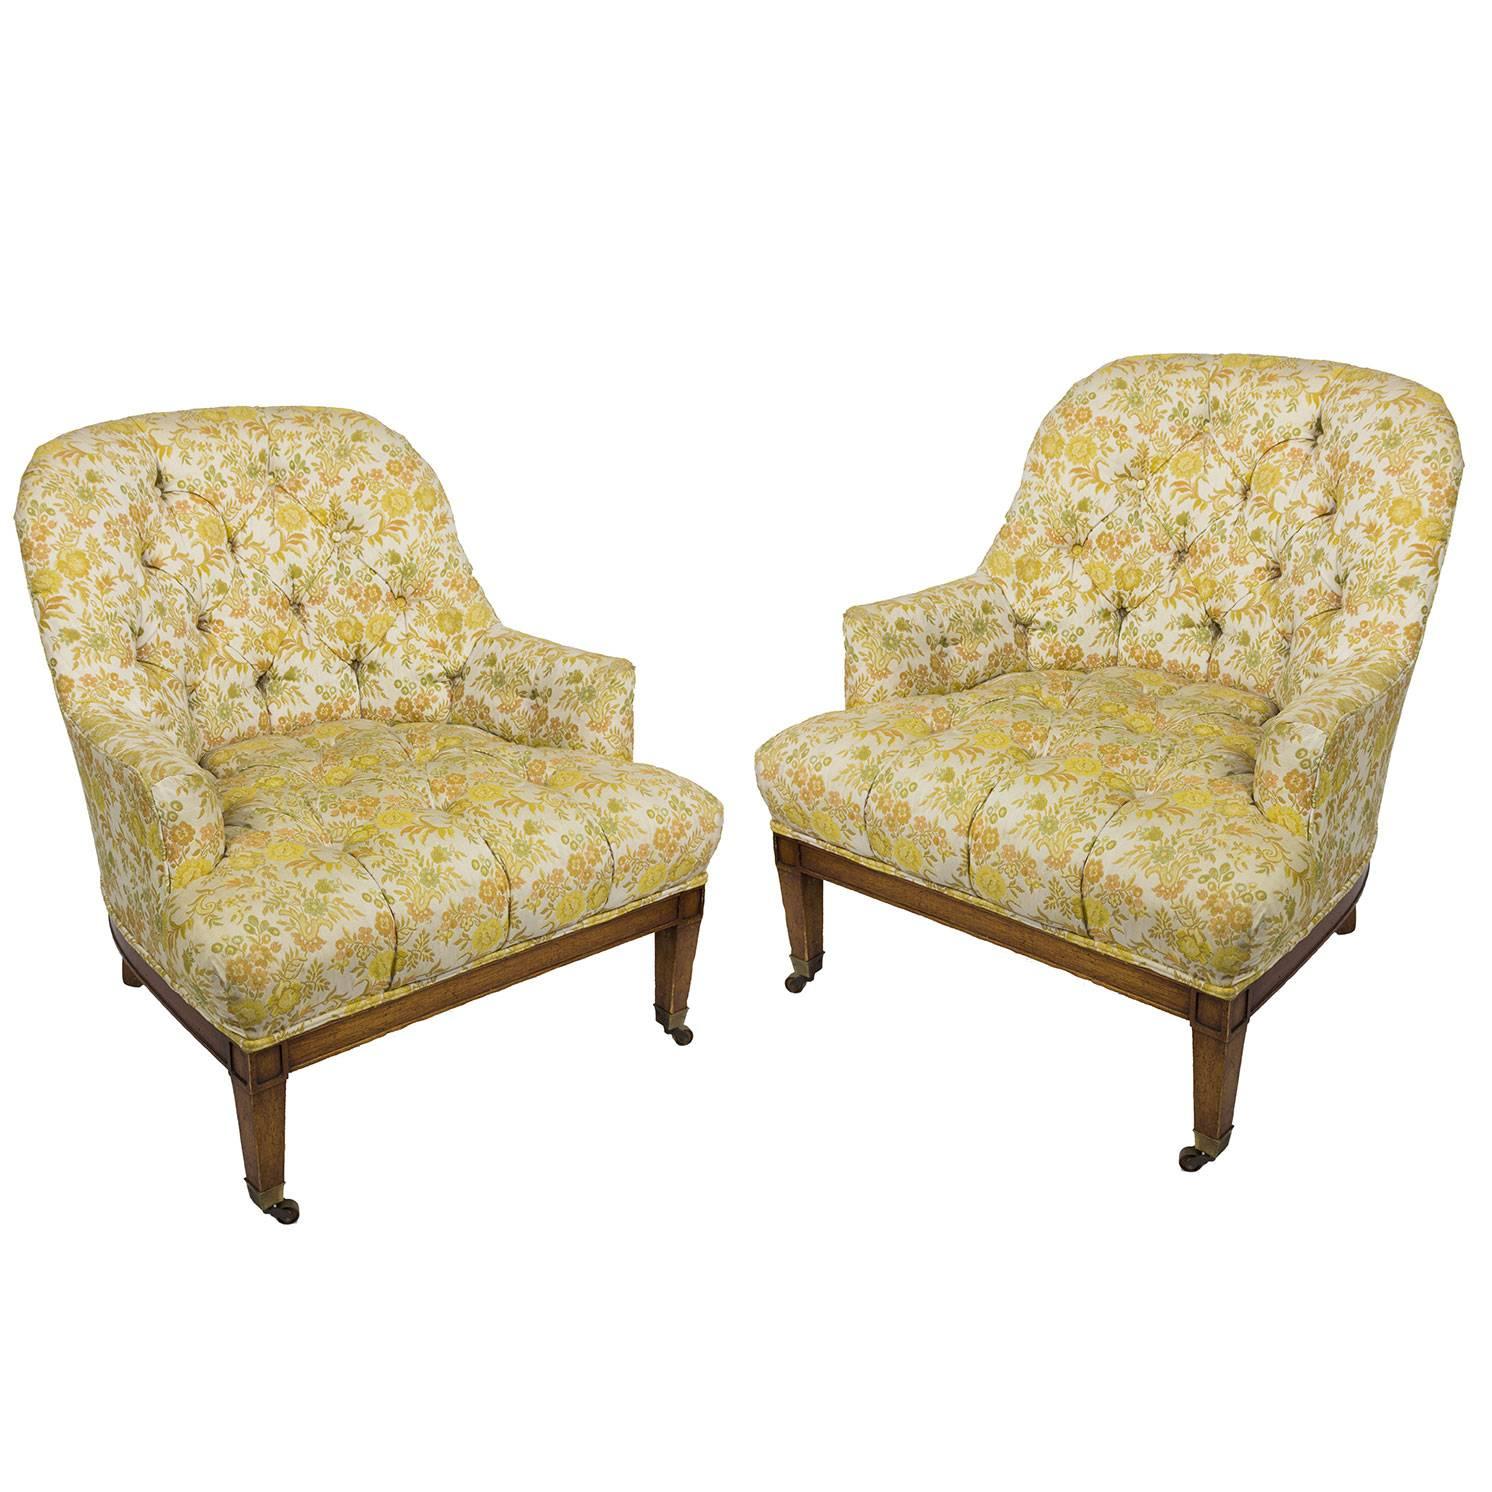 Pair of 1940s Tub Chairs